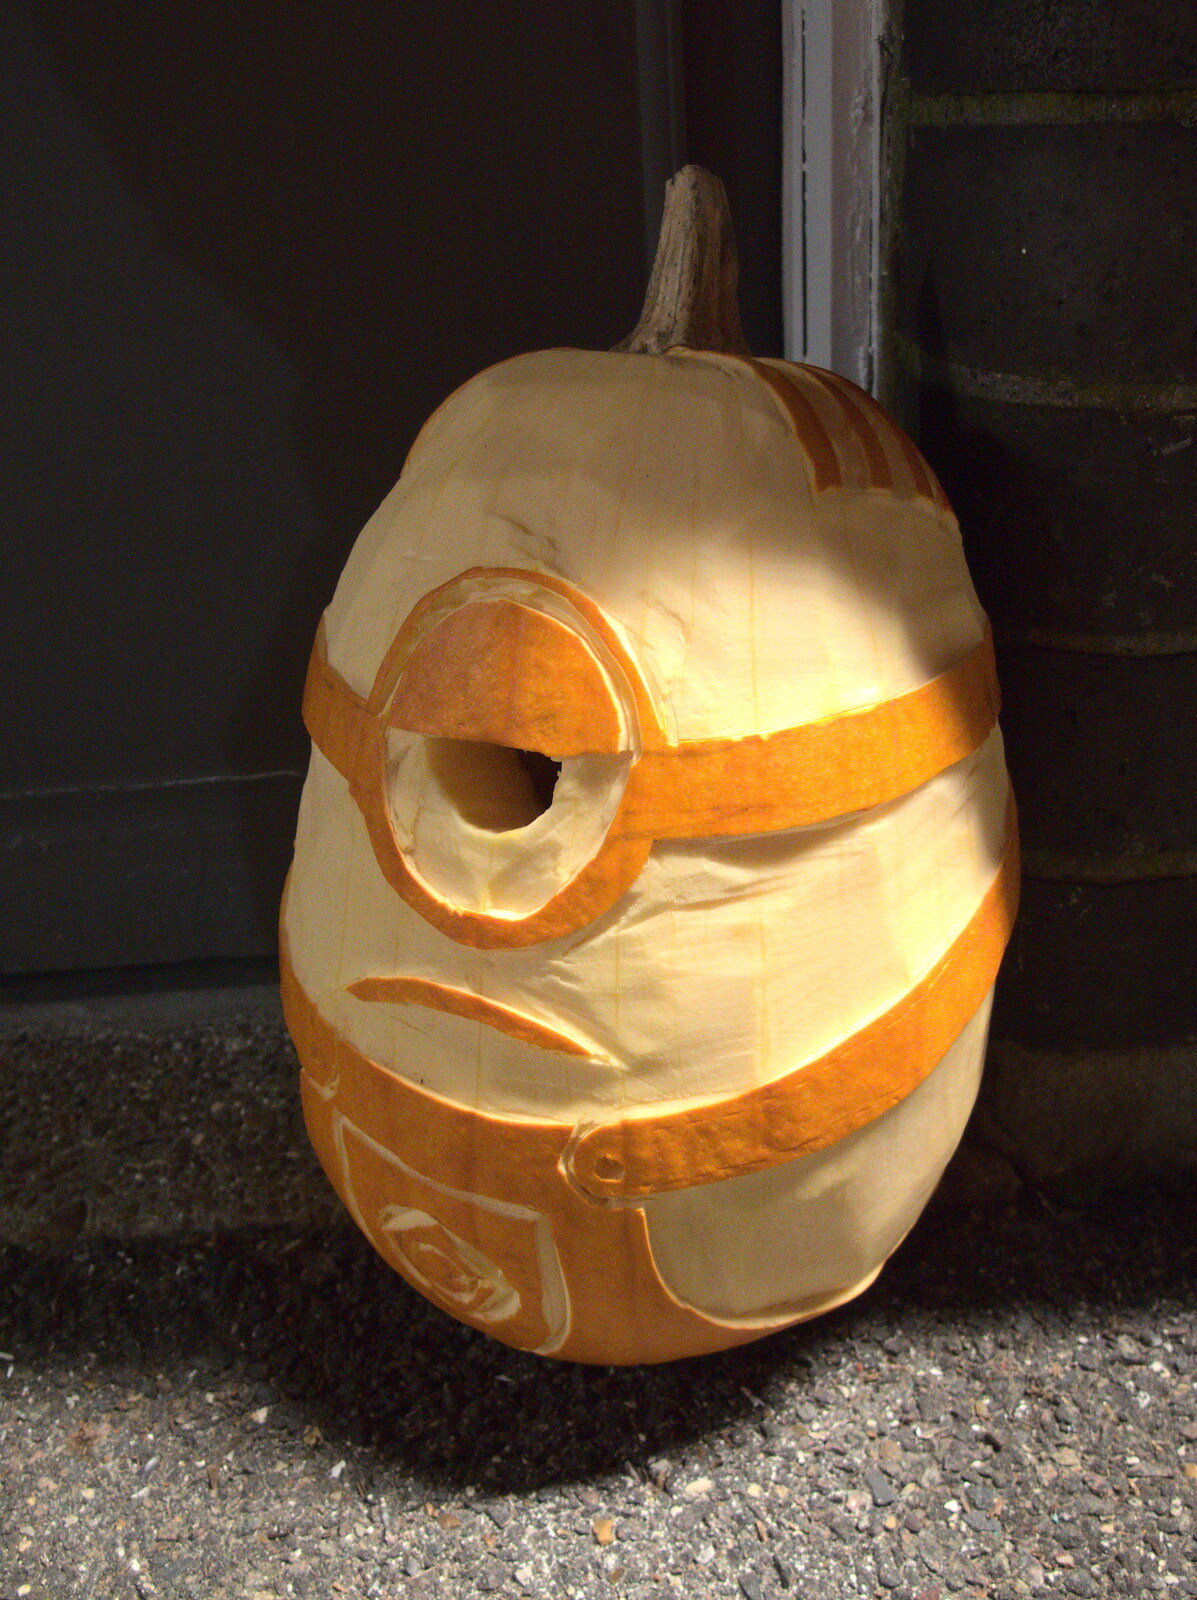 A minions pumpkin from The Norwich Beer Festival, St. Andrew's Hall, Norwich, Norfolk - 26th October 2016